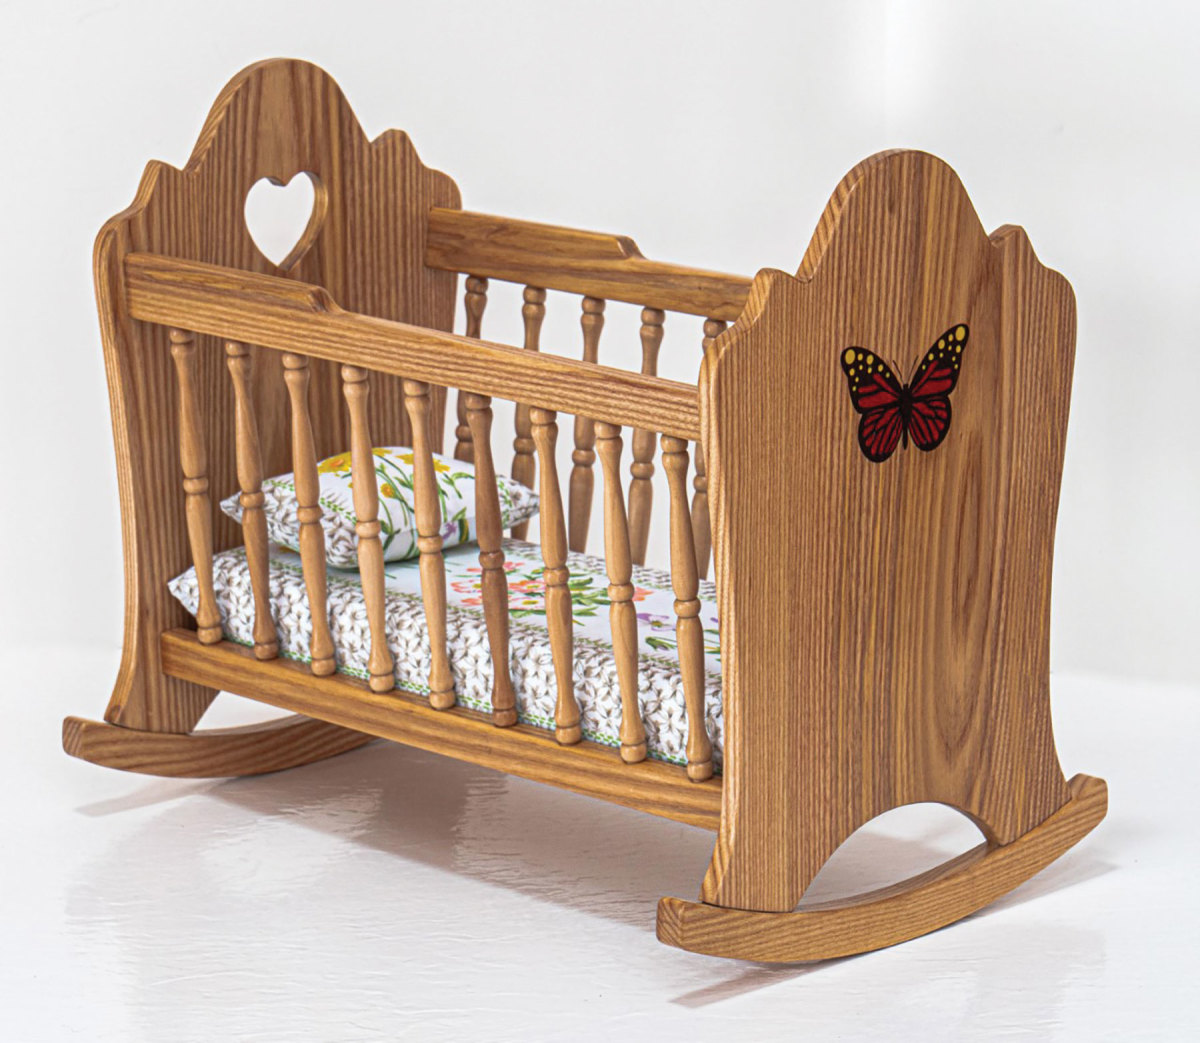 Cradle by Steve Schoenberg, winner of the toys category at Woodworker’s Showcase.